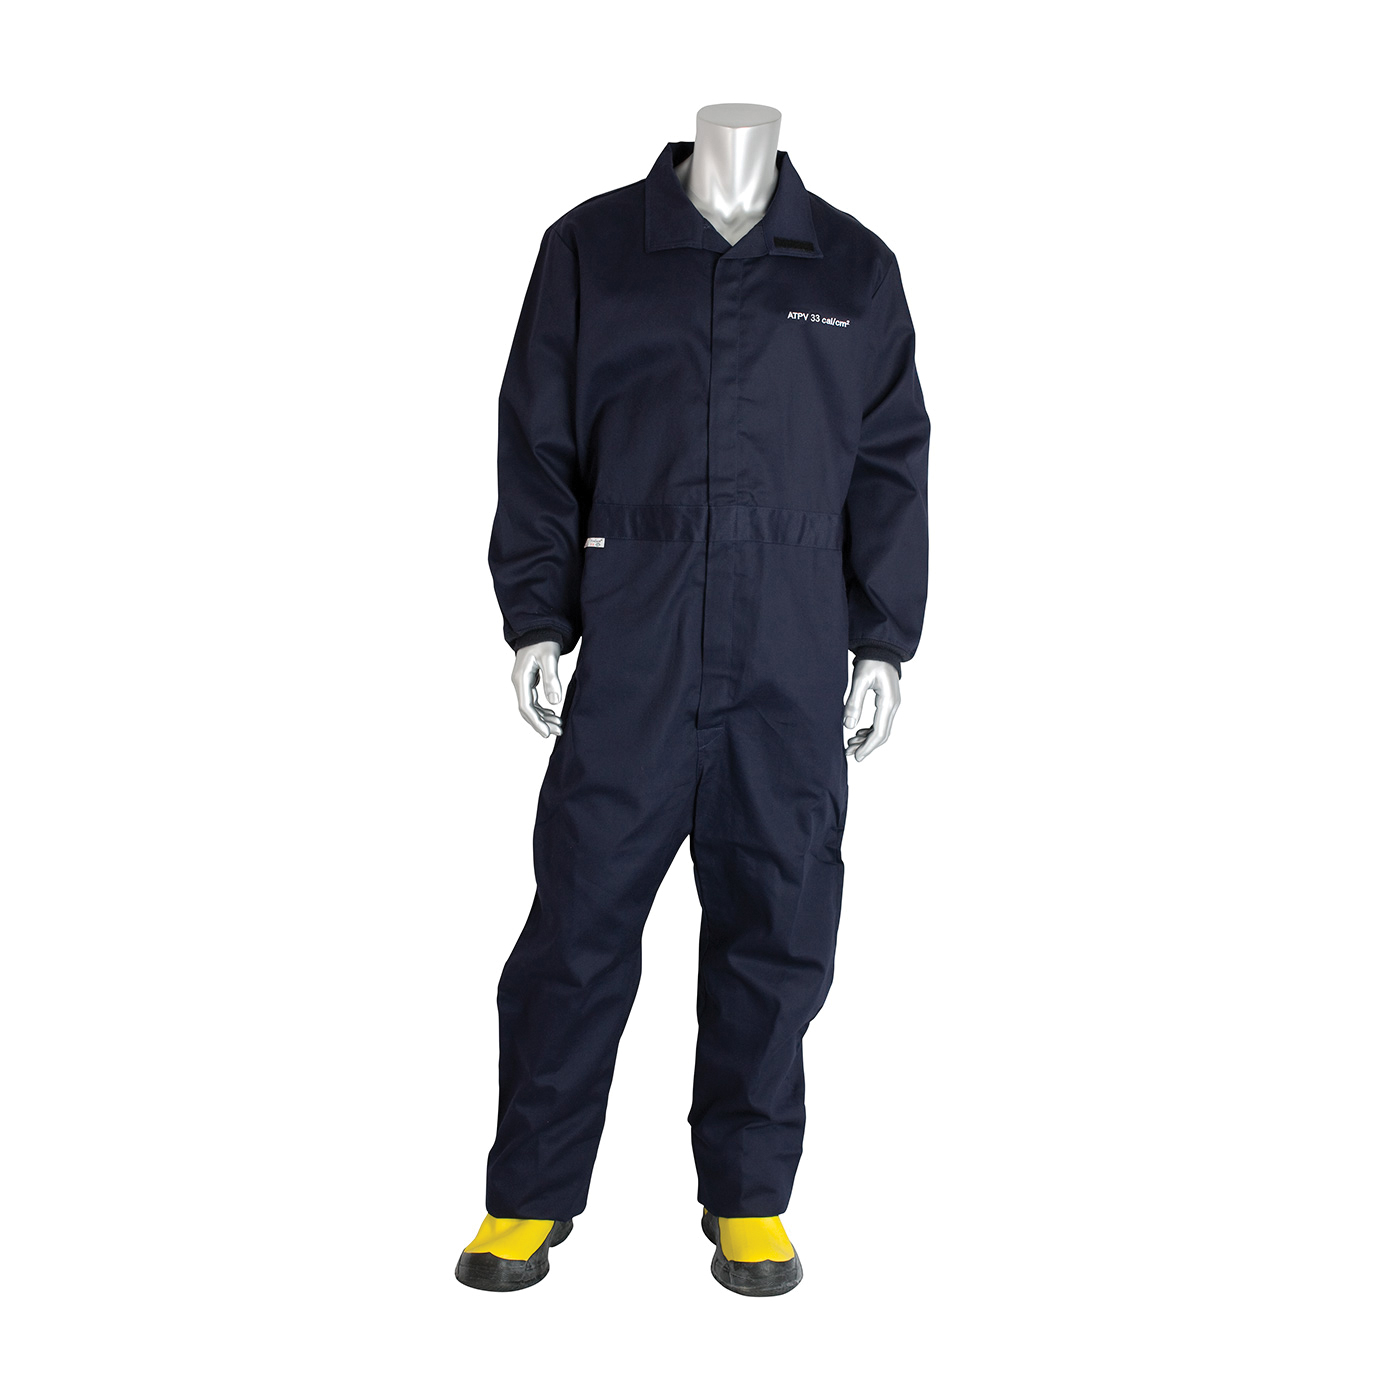 PIP® 9100-52758/4XL Flame Resistant Coverall, 4XL, Navy, 88% Cotton/12% Nylon, 60 to 62 in Chest, 32 in L Inseam